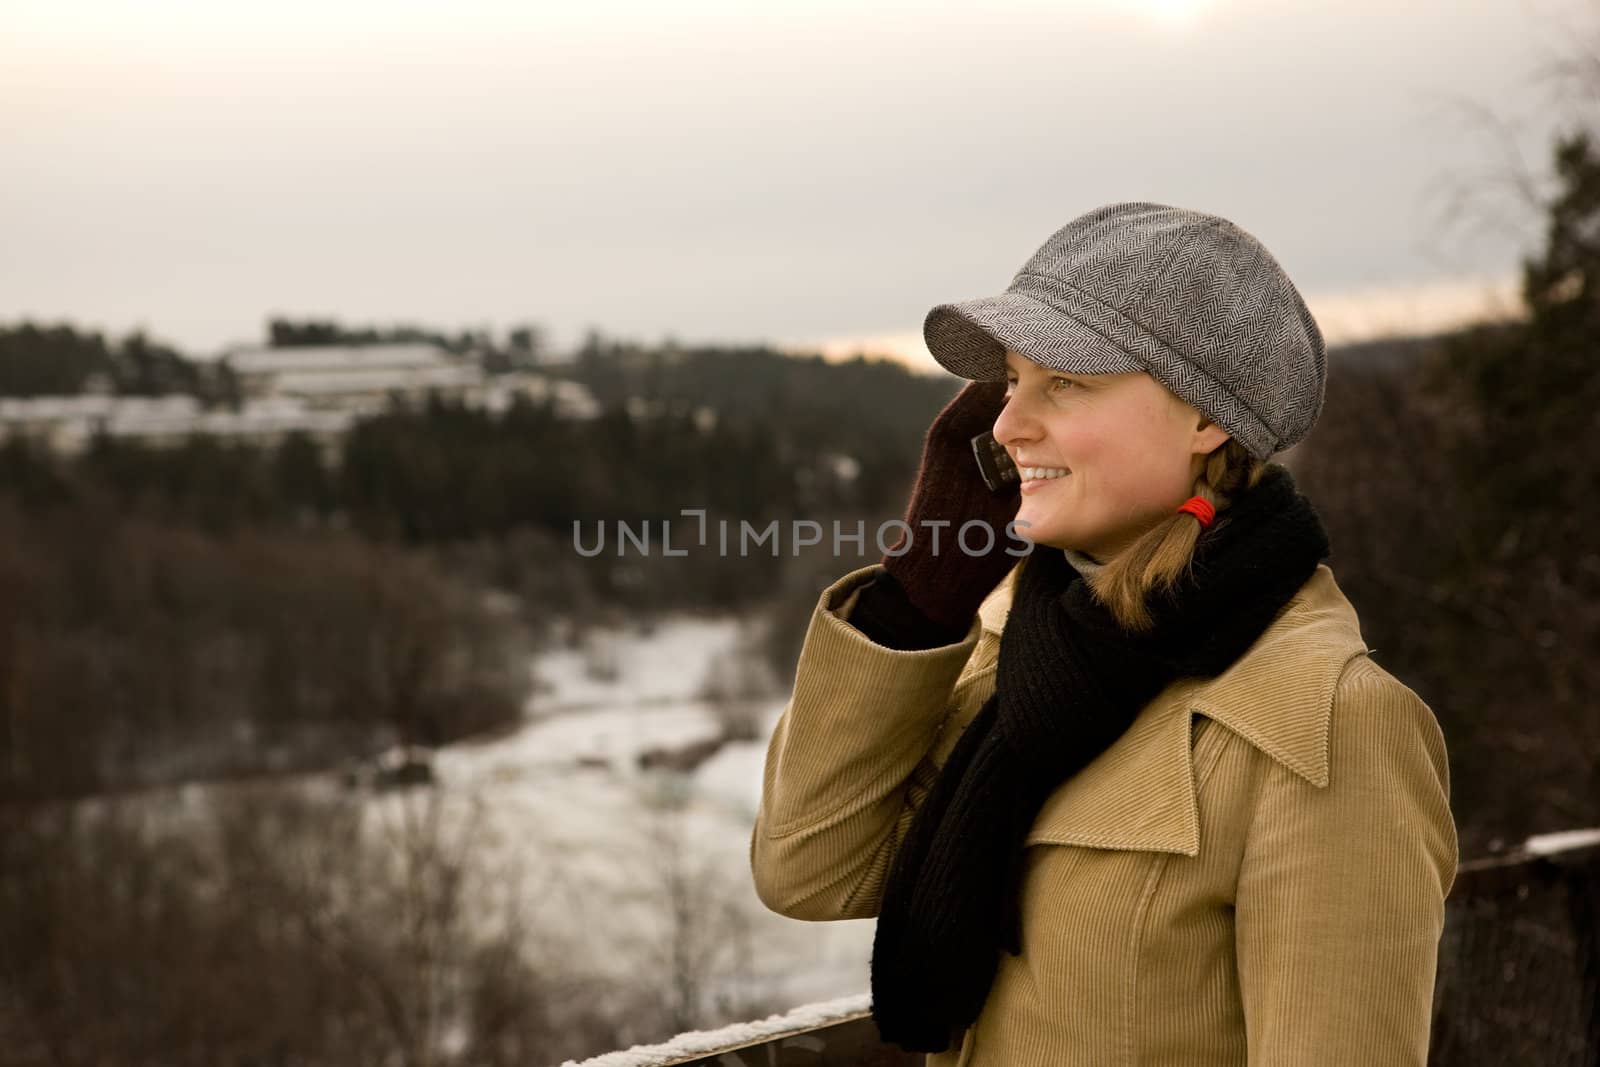 A young woman outside in winter talking on a cell phone